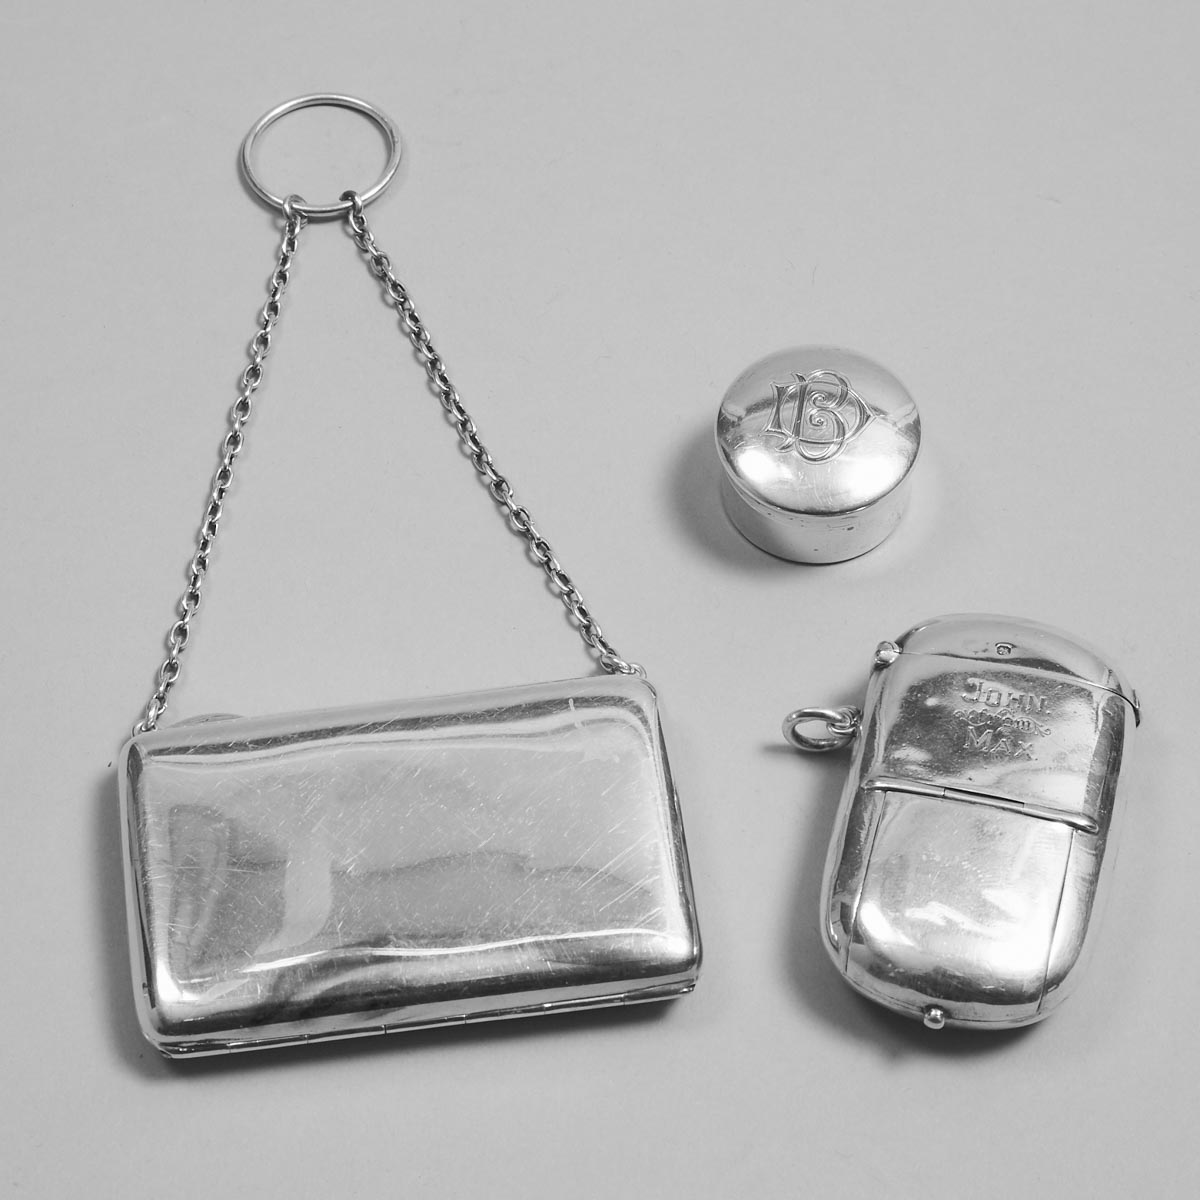 Late Victorian, Edwardian and Later English Silver Small Purse, Circular Box and a Vesta Case, c.1898-1916